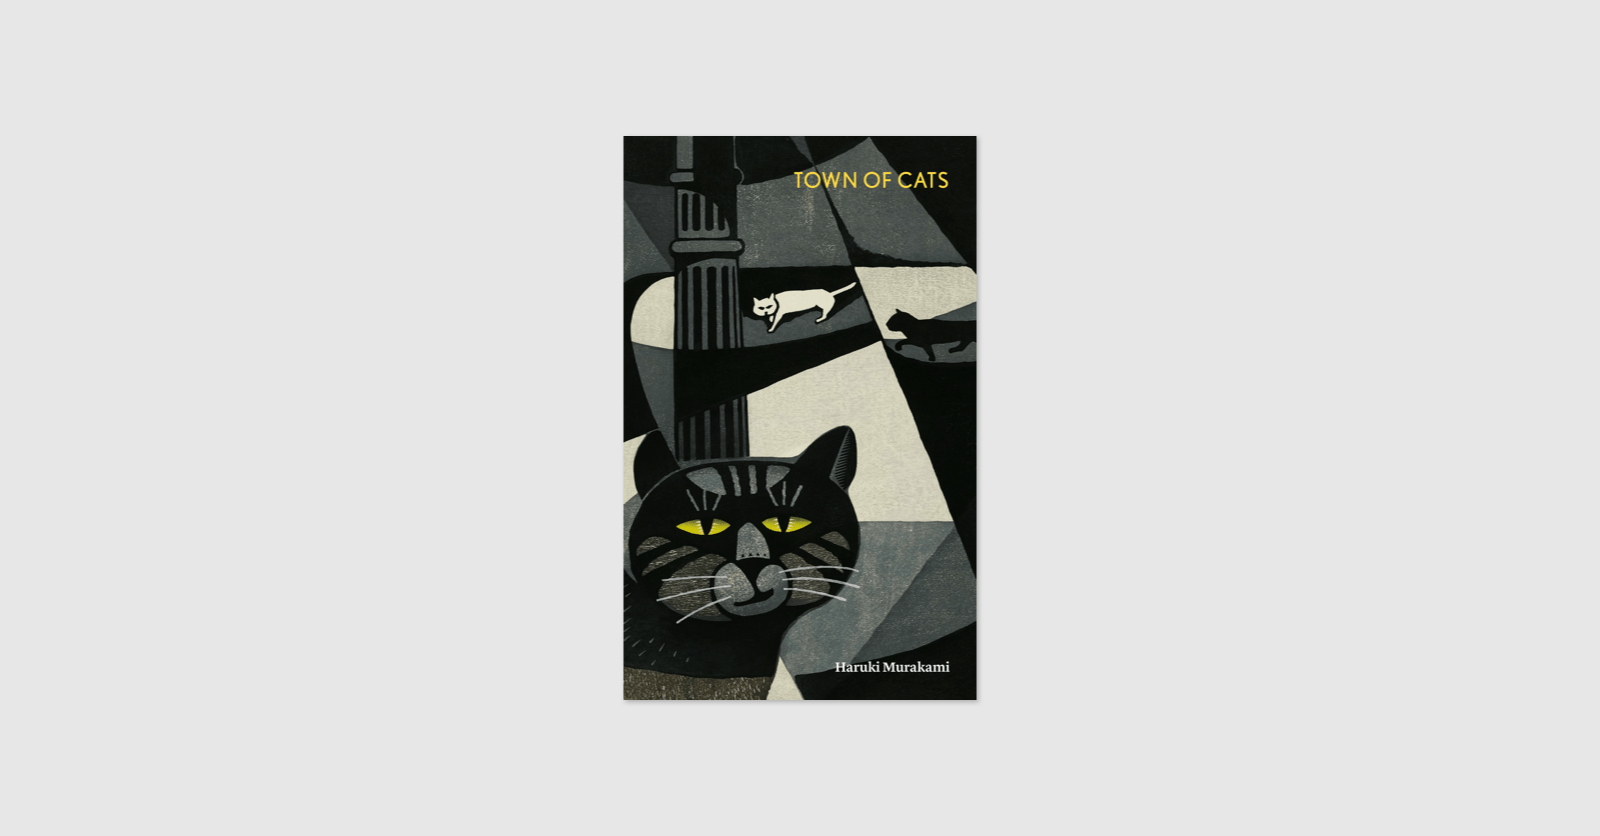 A book cover. Title: Town of Cats by Haruki Murakami. An woodblock print of a cat is shown. It is a collection of short stories.